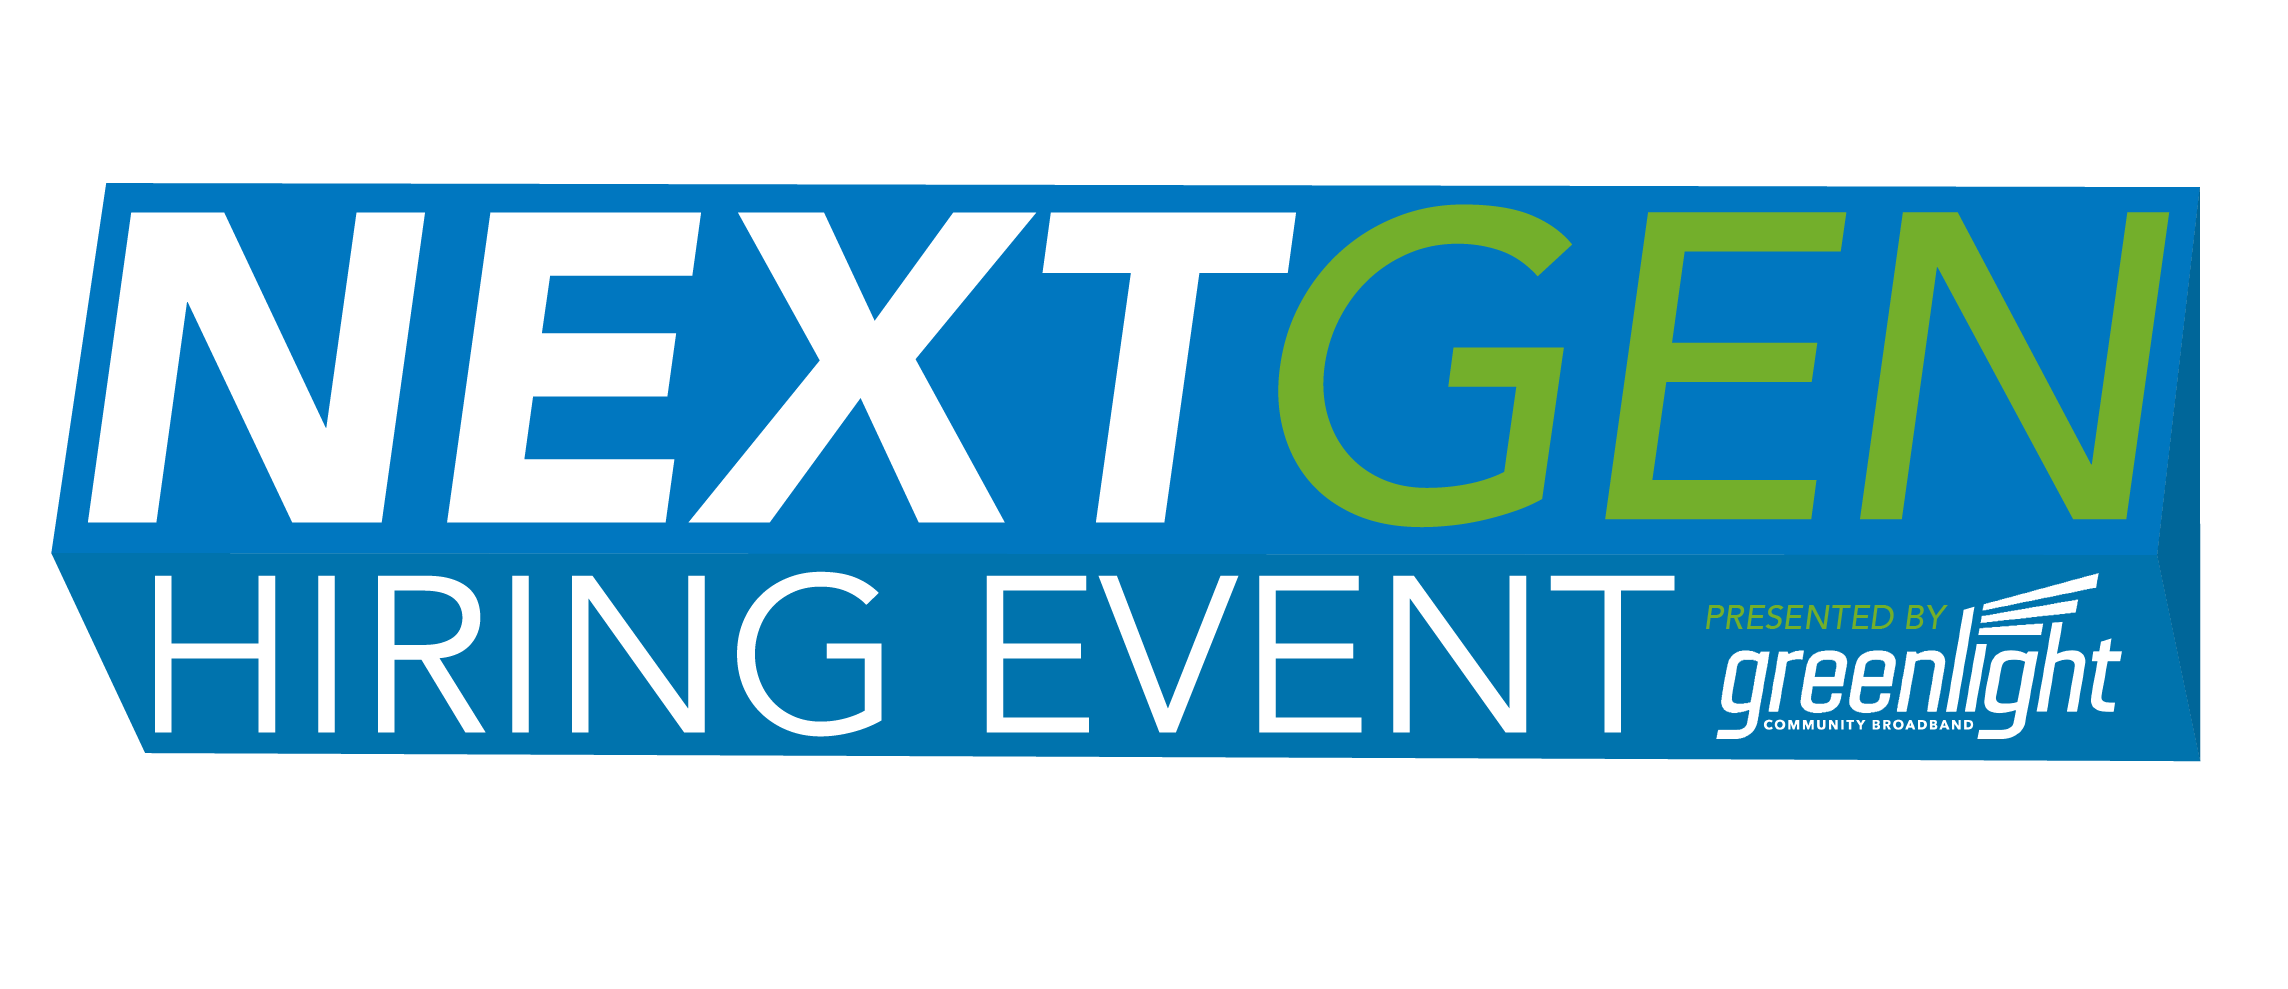 Growing our workforce with the NextGen Hiring Event